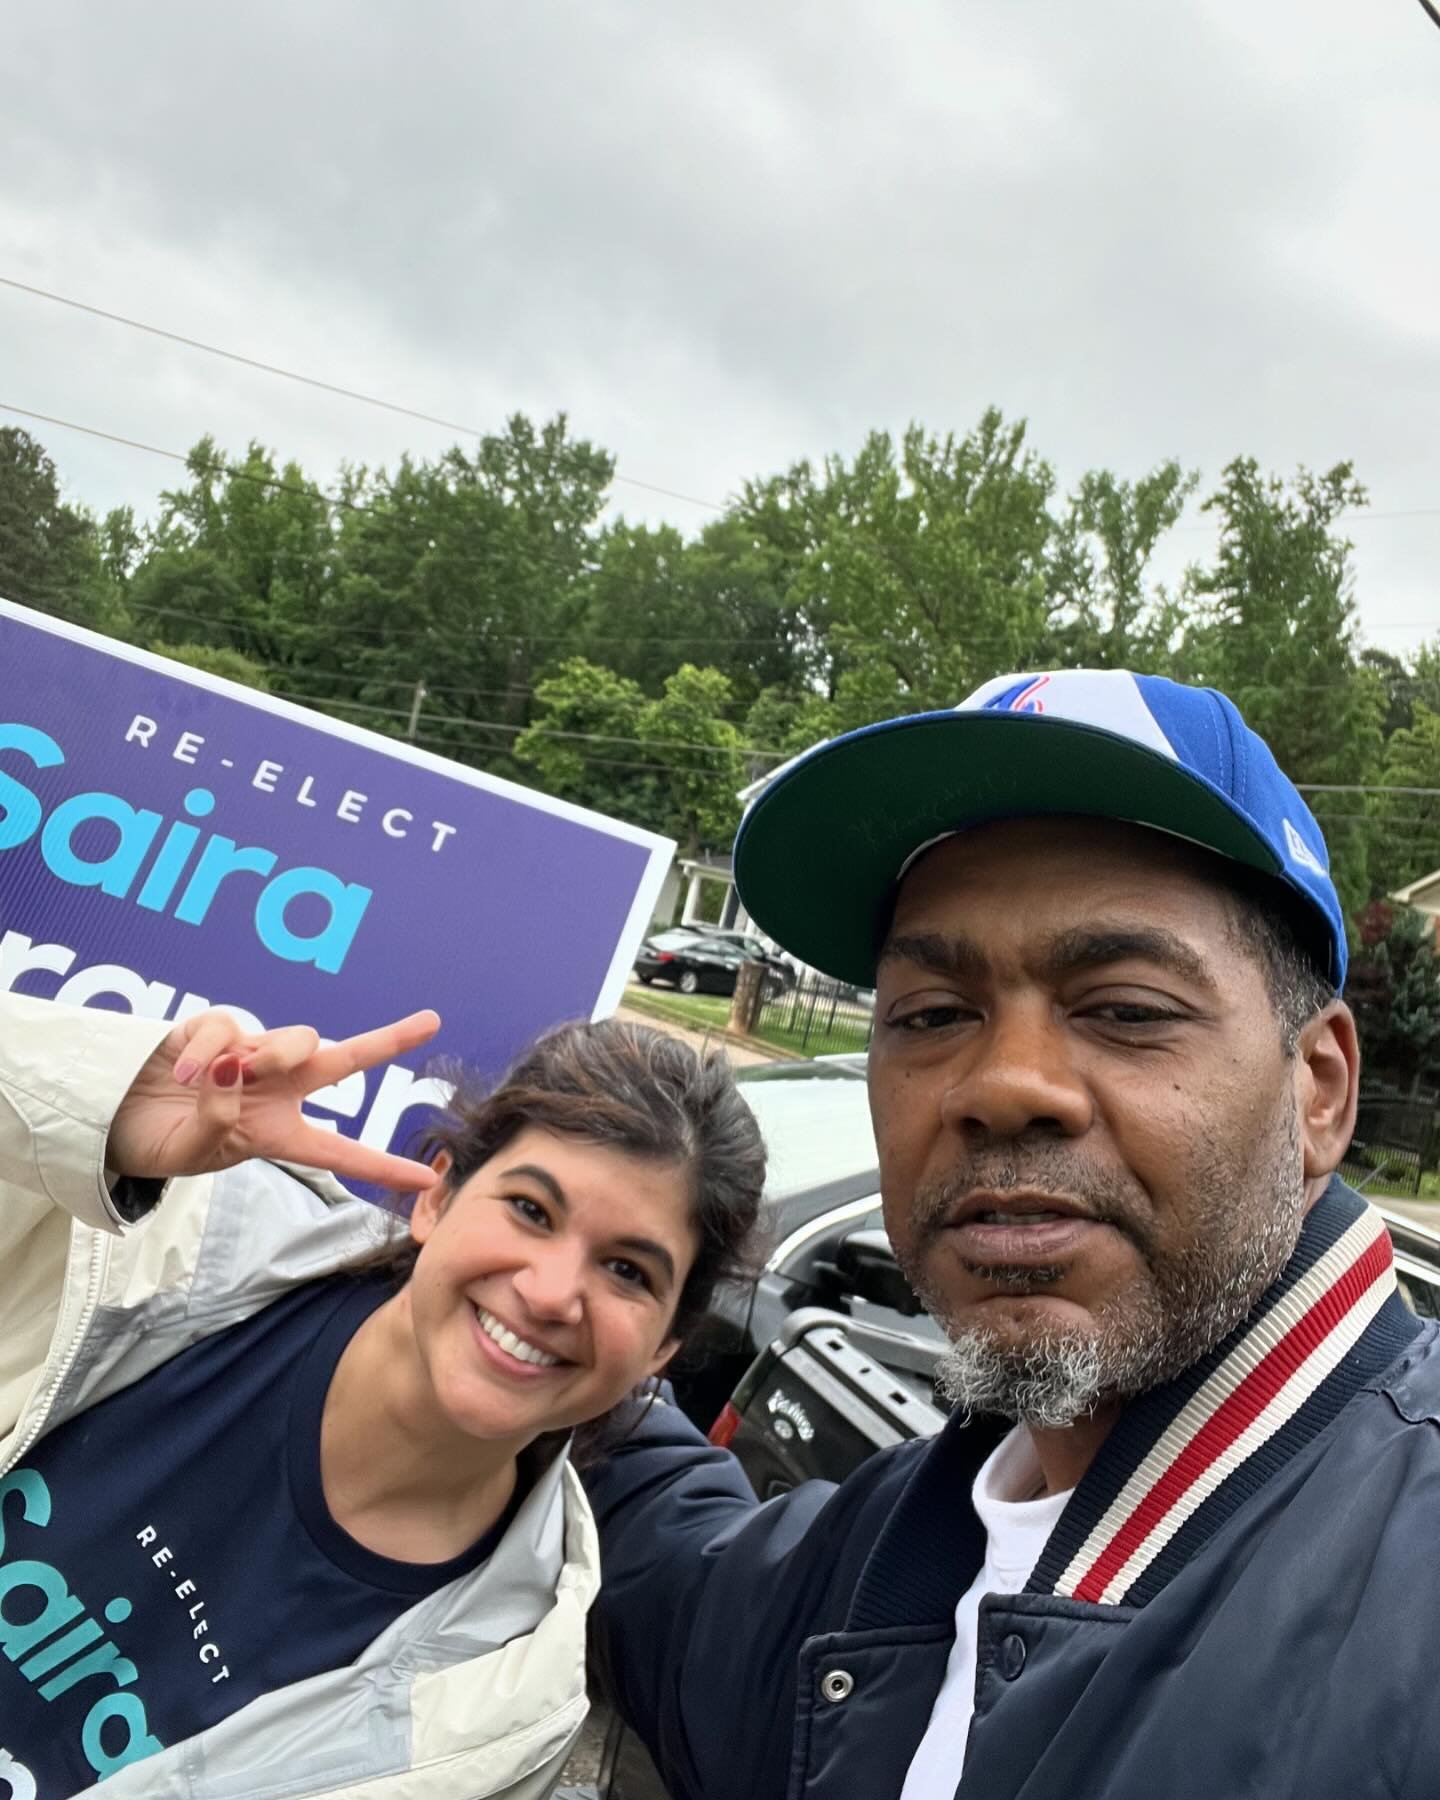 Good talks at the doors today in district 90! Talked with Shaun about Cedar Grove High School football and &mdash;this was a first&mdash; got to try out his bike! 

#hd90 #votesaira #votemay21